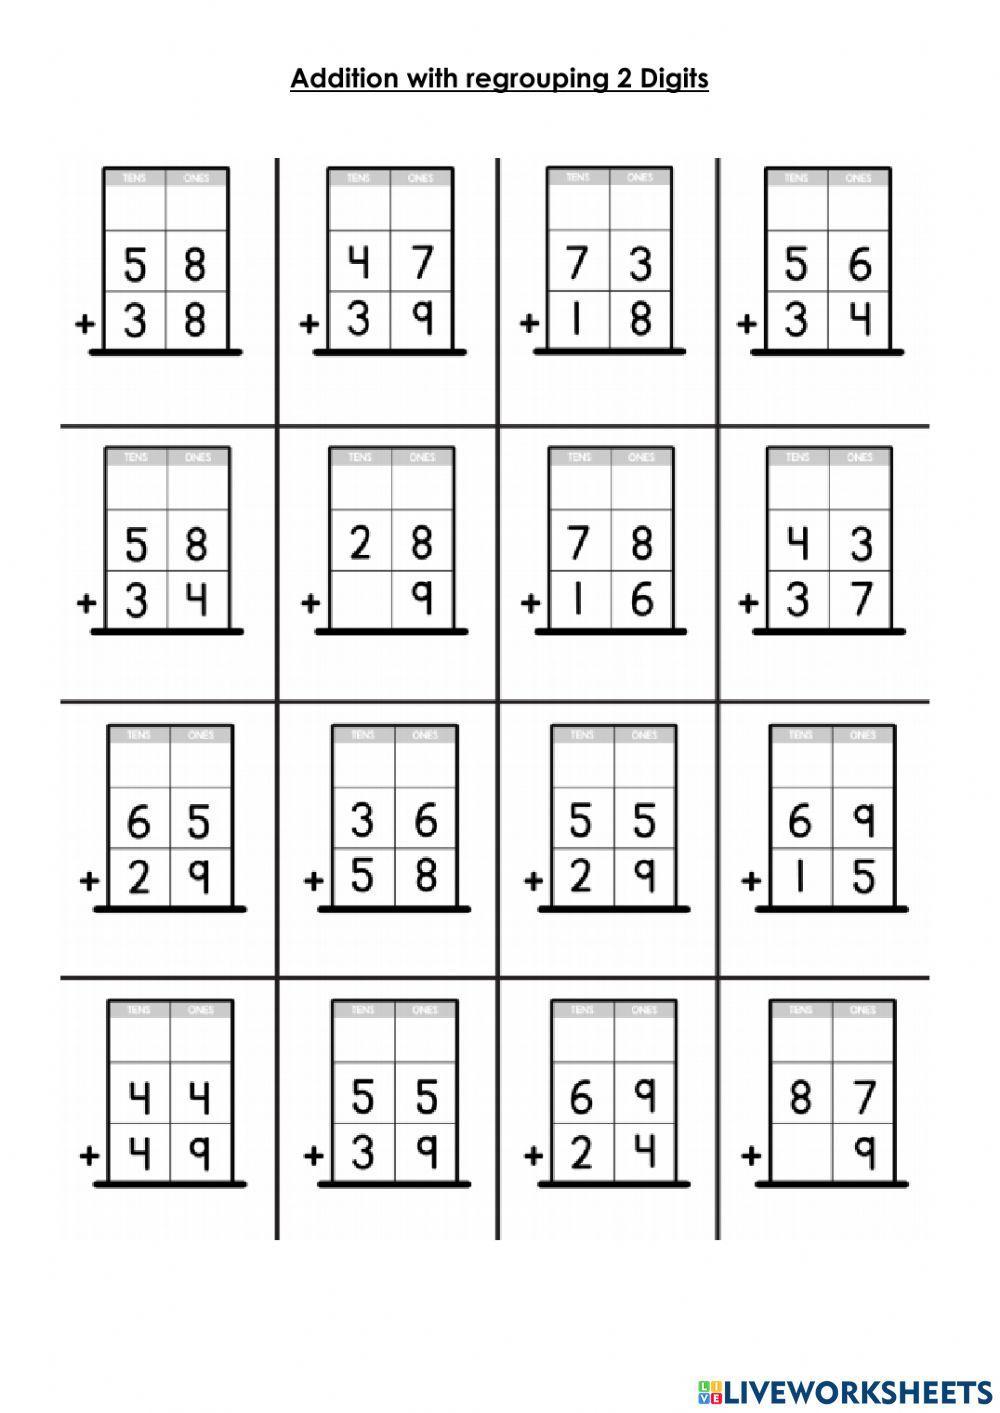 Addition with regrouping 2 digits